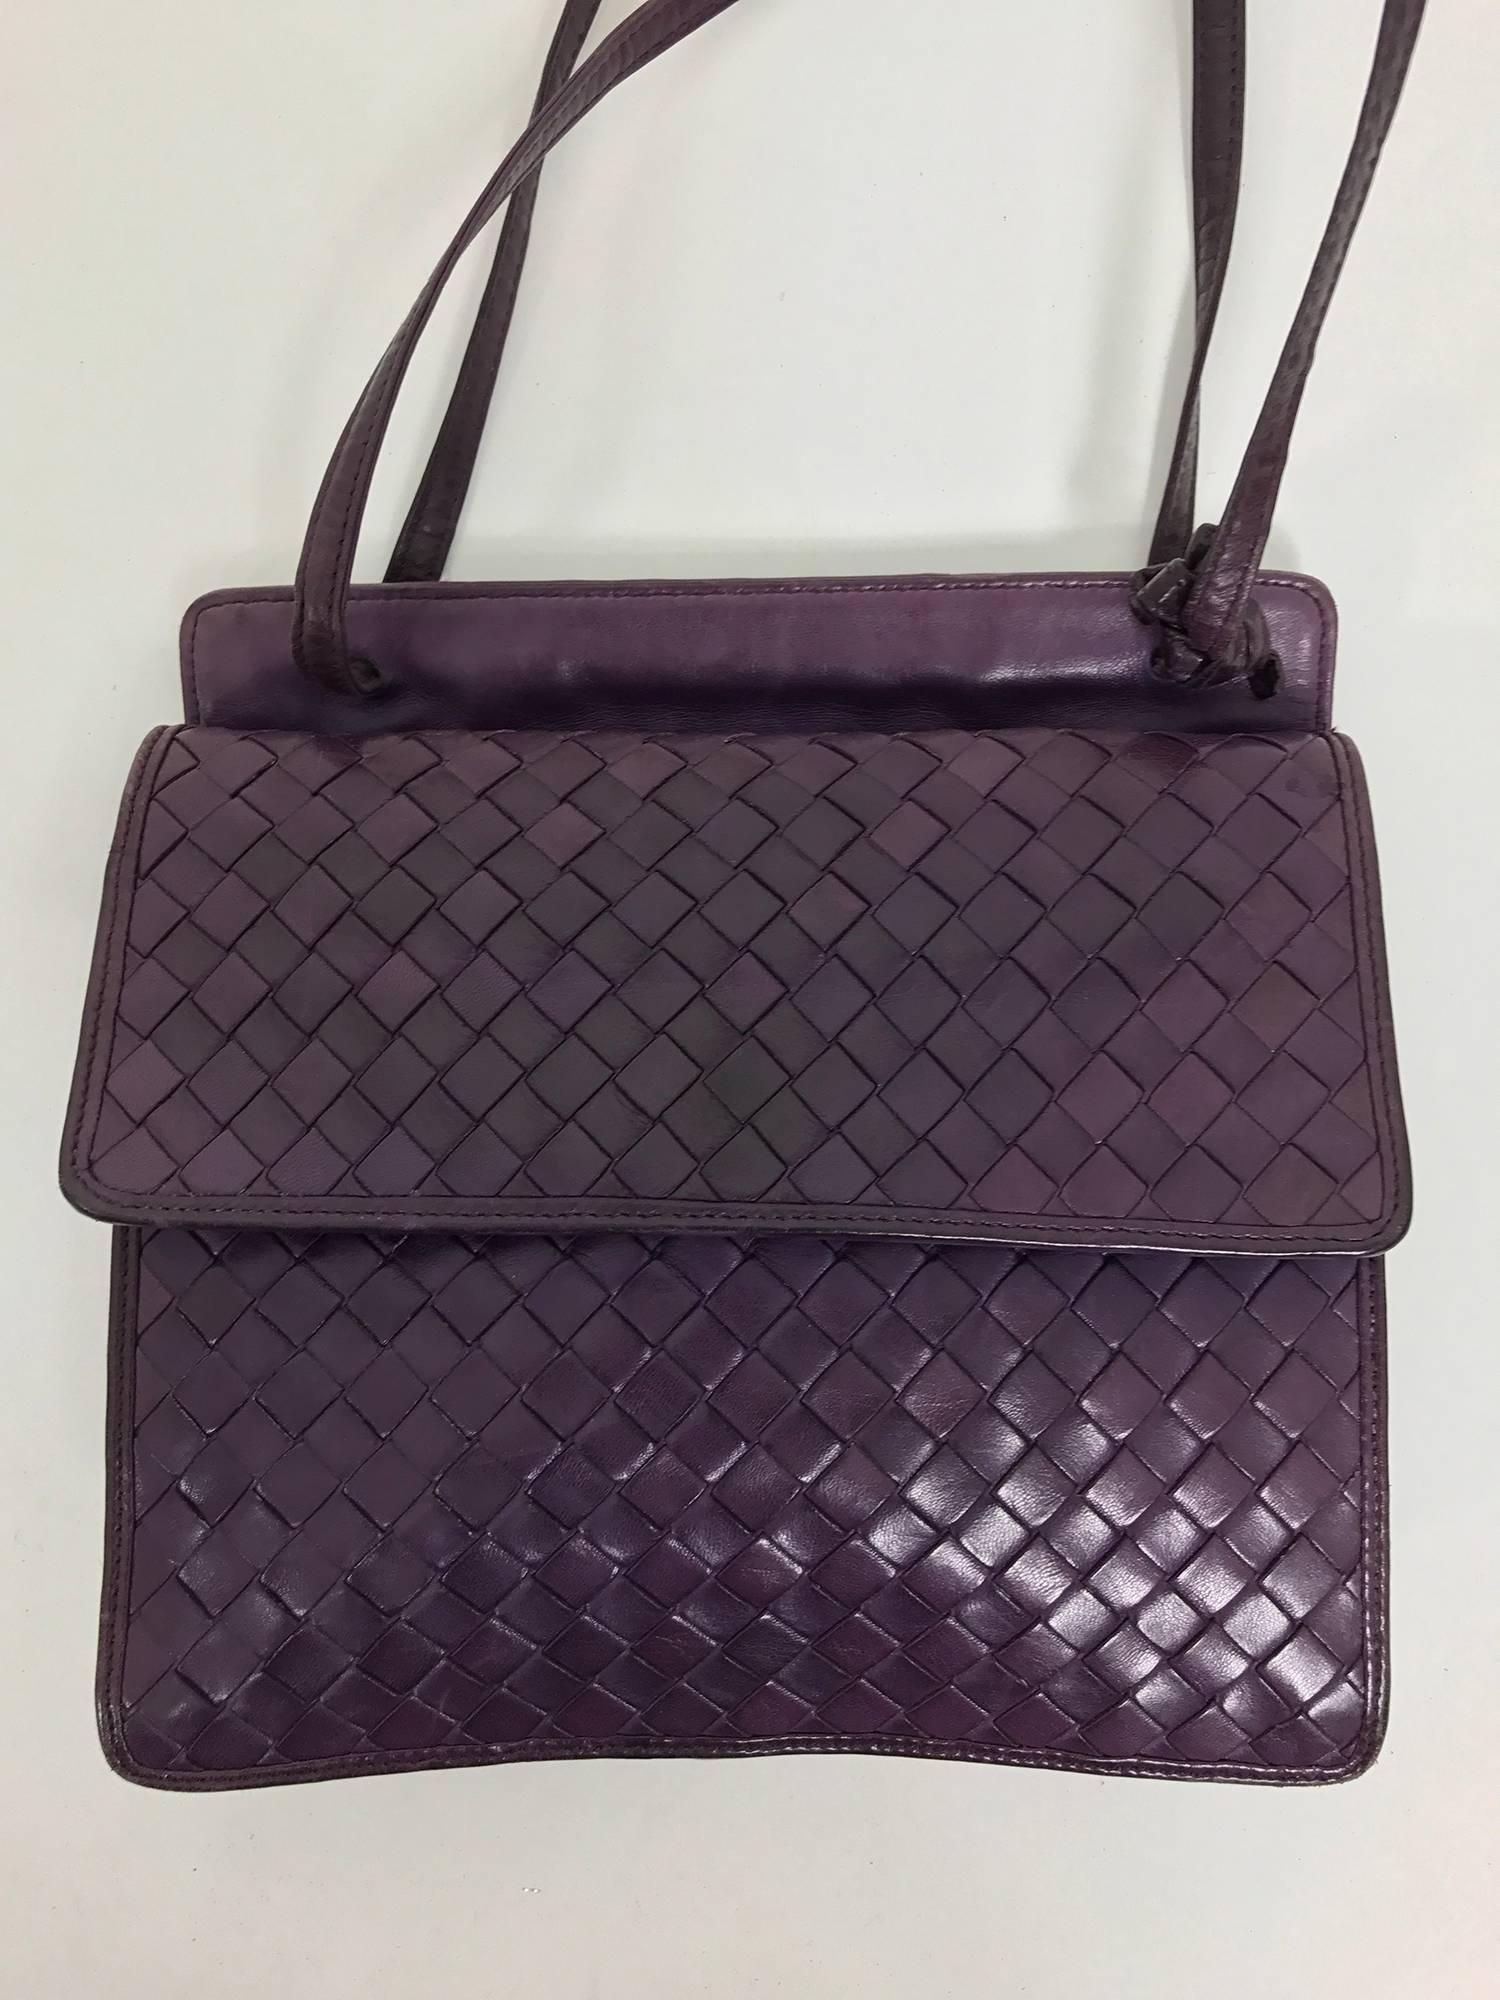 Bottega Veneta vintage 1980s intrecciato soft purple leather handbag from the 1980s...Can be carried as a shoulder bag...Flap front bag with gusseted sides and bottom...Interior features a single back side pocket with a zipper closure...The bag has